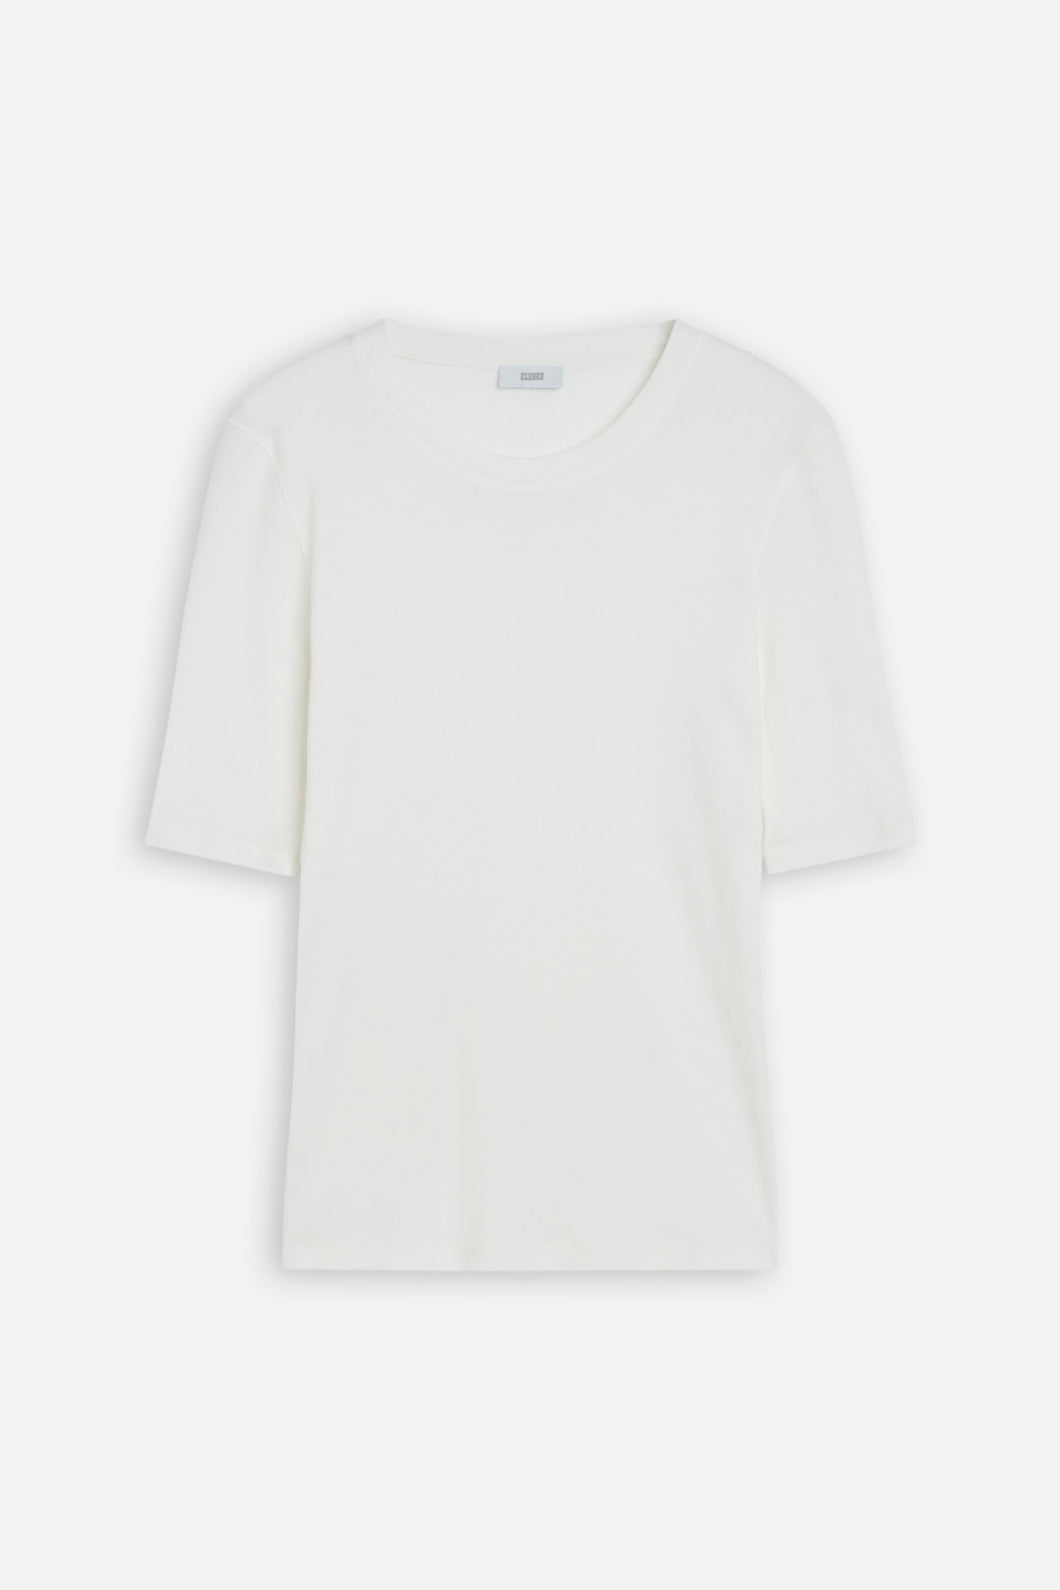 CLOSED RIB JERSEY BASIC TEE IVORY - S. LABELS